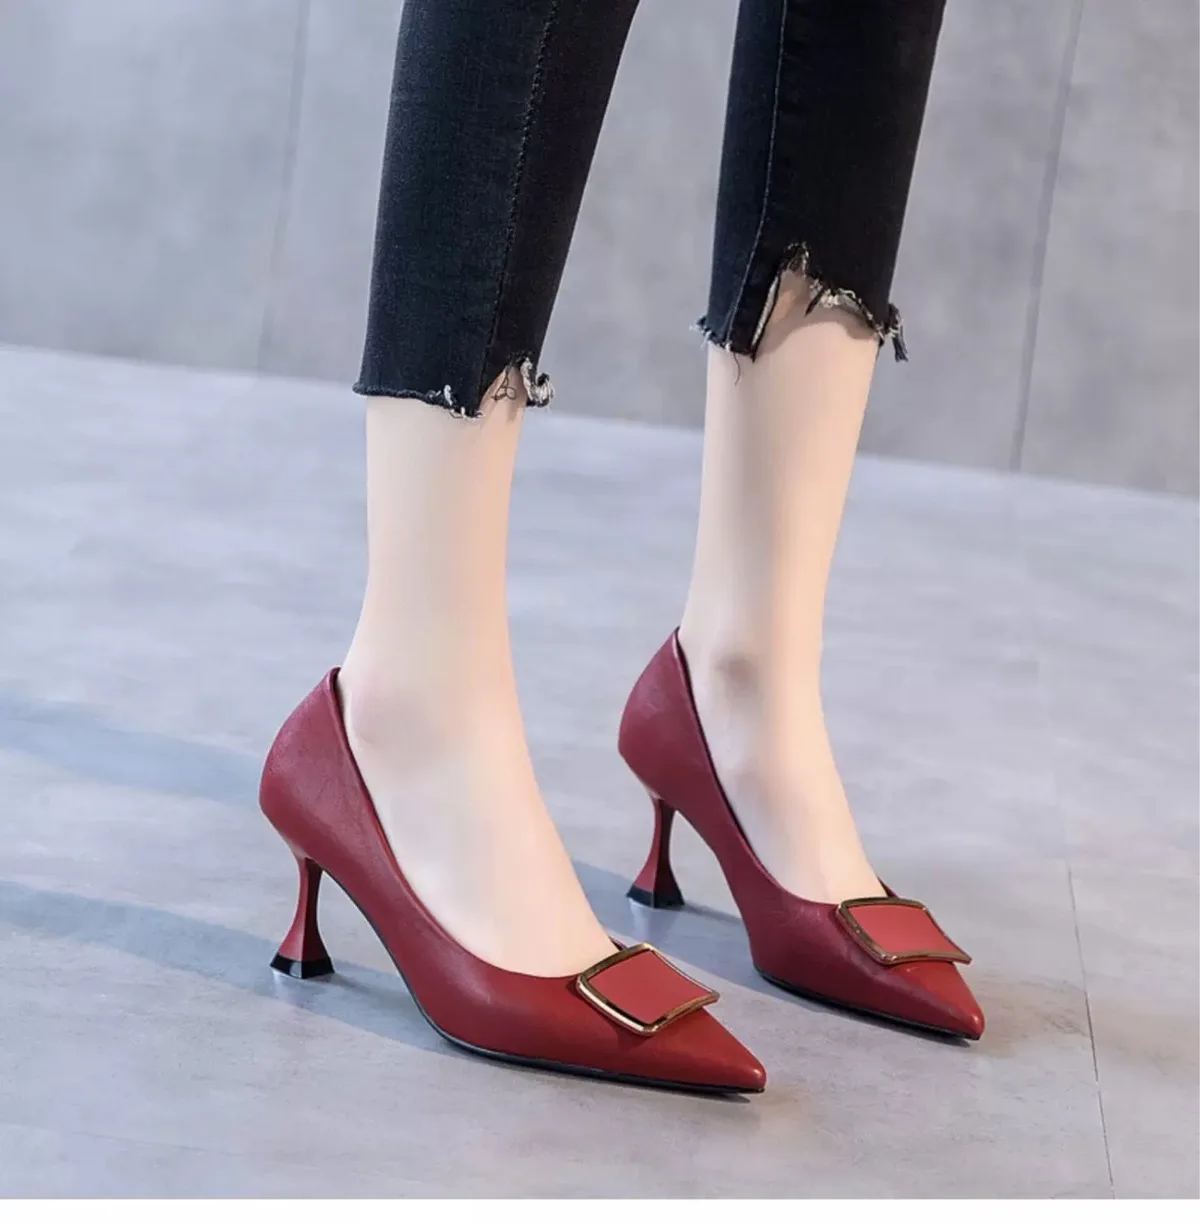 

Women's Sexy Heels High-heeled Shoes Woman Spring Summer 2022 Platform Sandals Scarpe Donna Small Heel Pumps Mary Janes Shoe New